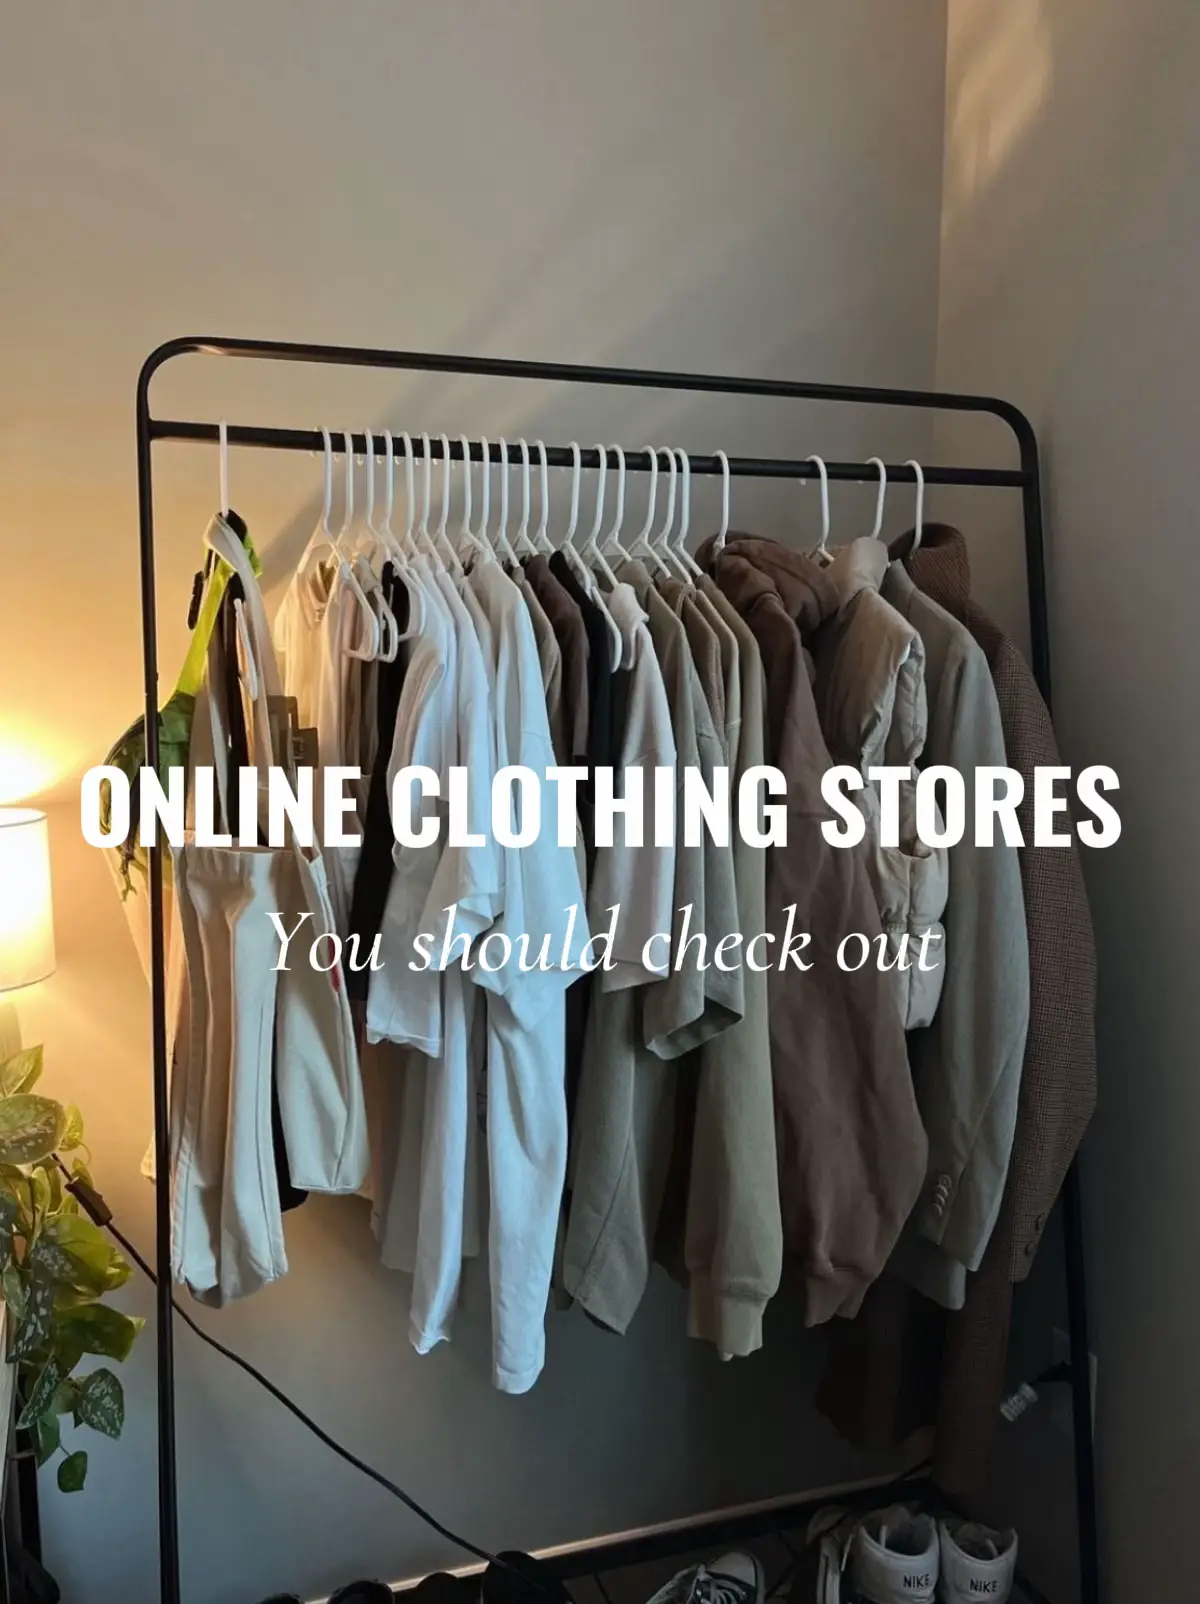 Brandy Melville Women's Clothes for sale in Kent, Kent, United Kingdom, Facebook Marketplace